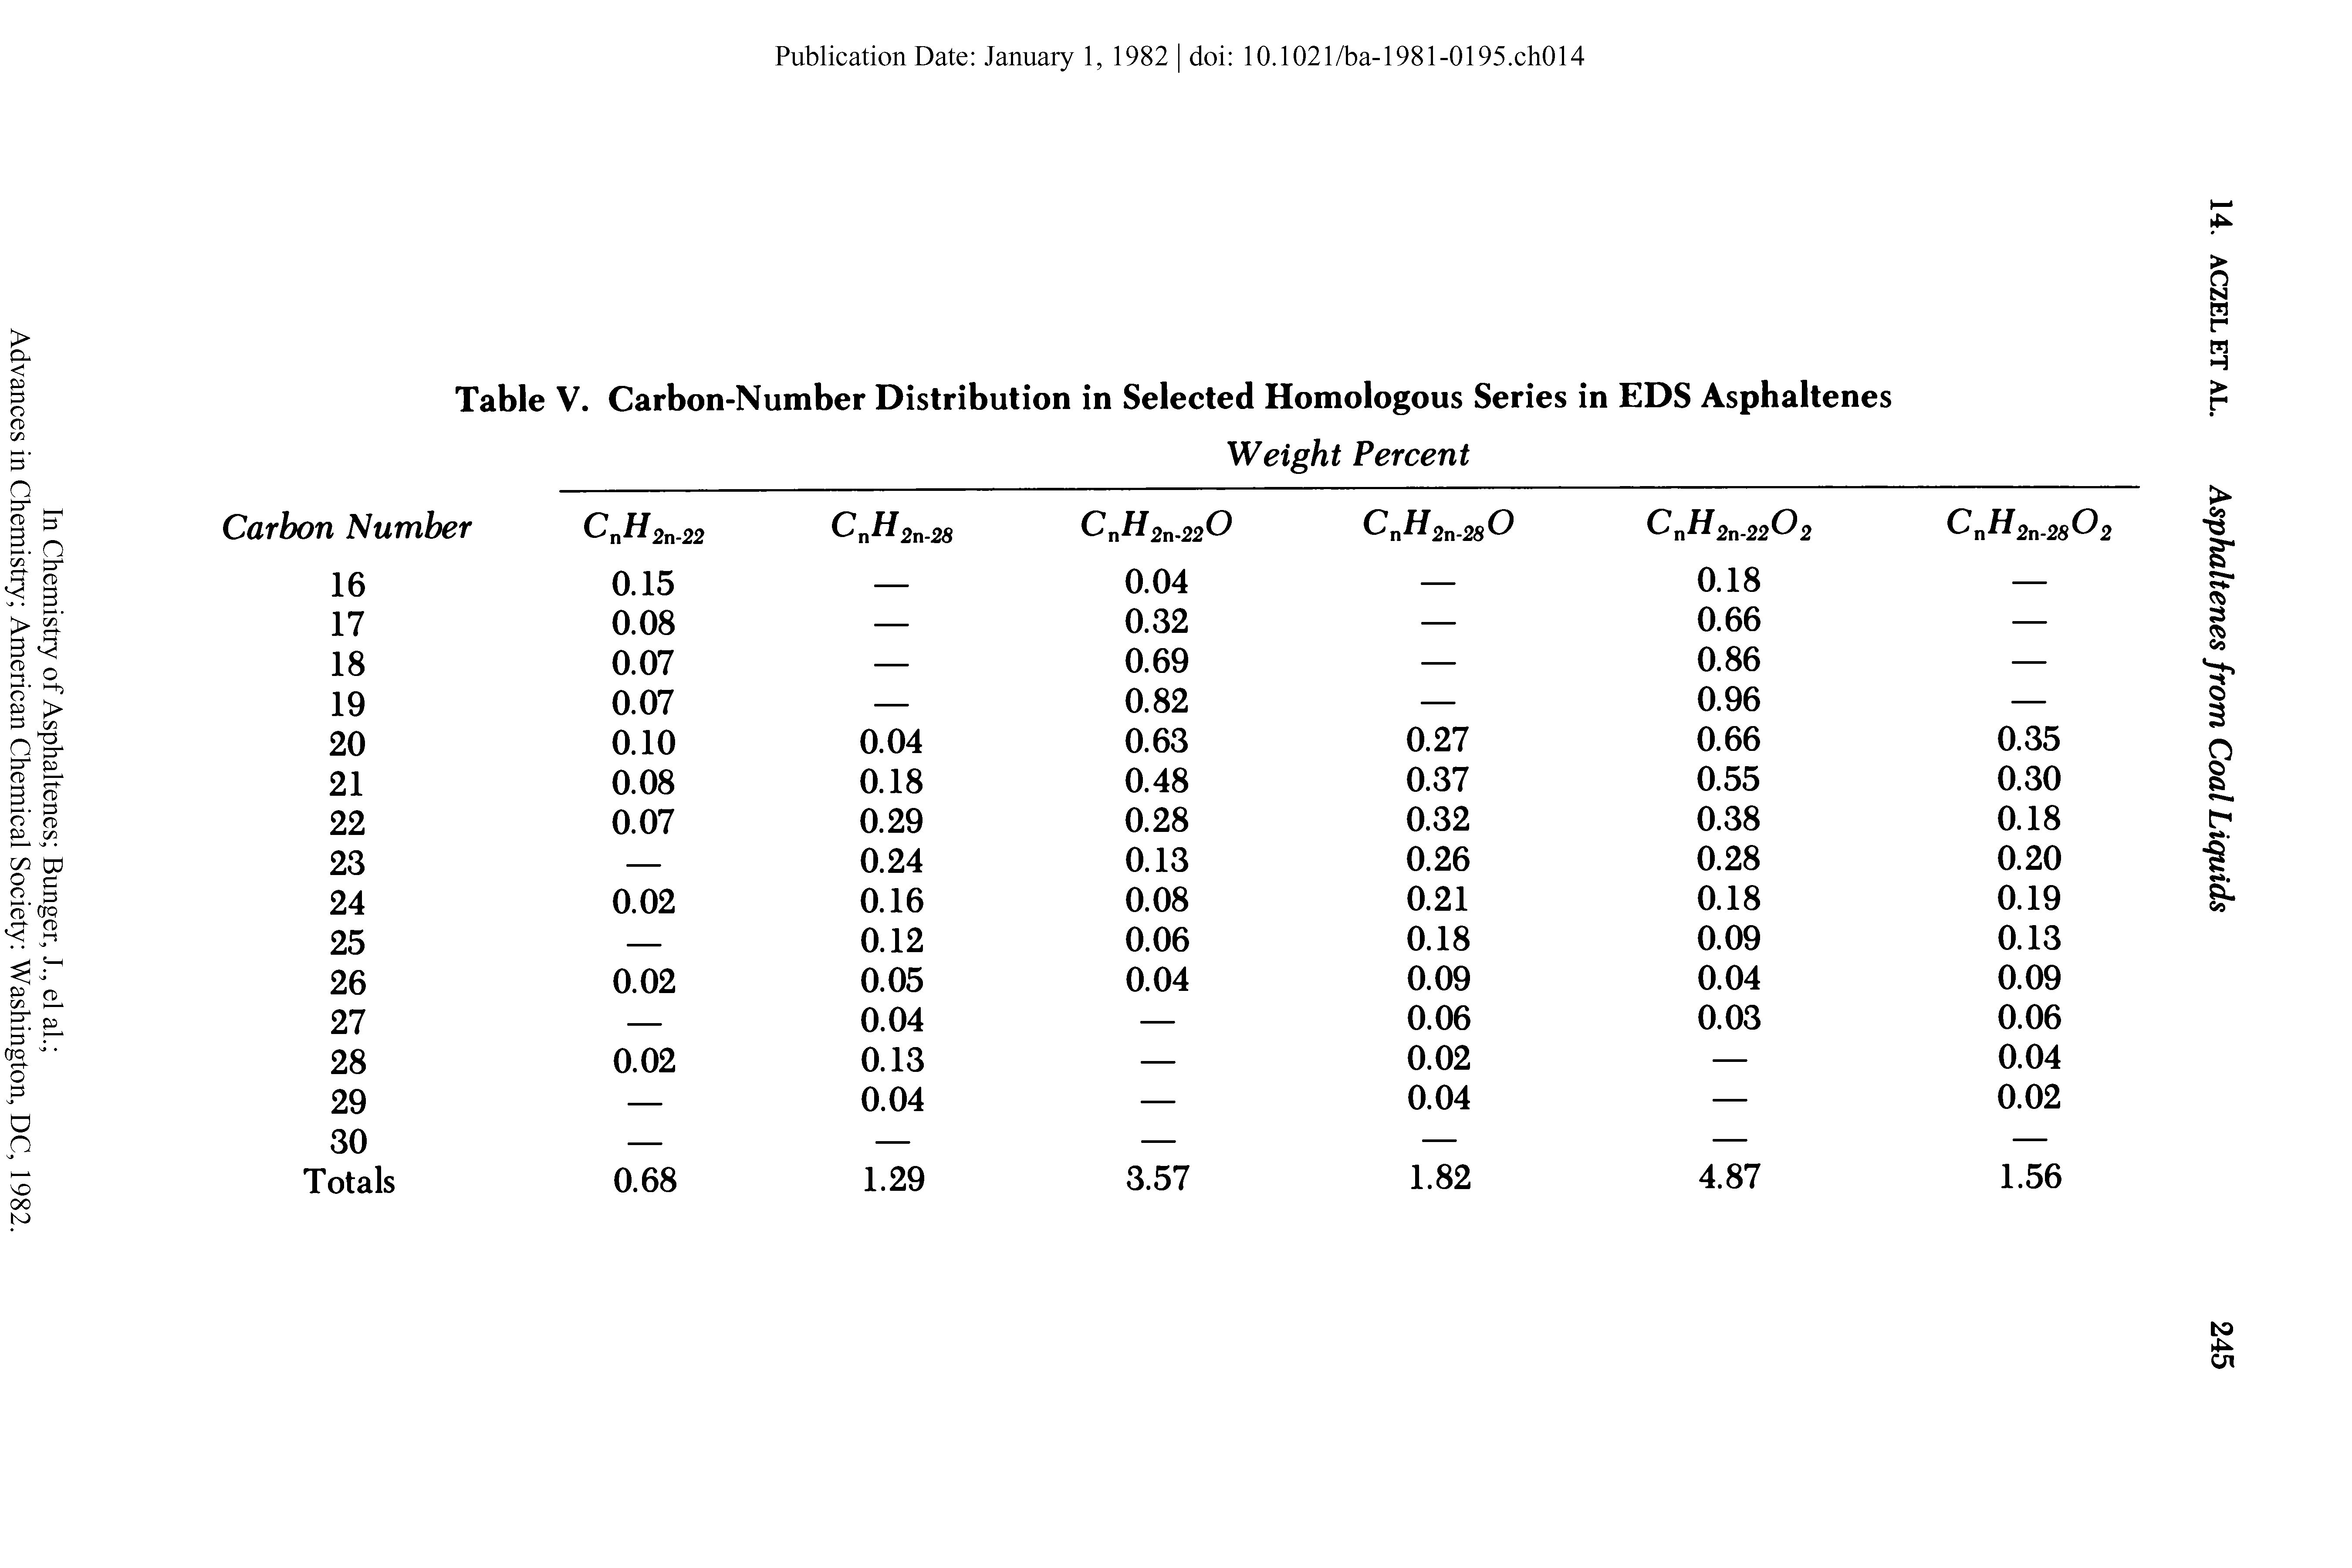 Table V. Carbon-Number Distribution in Selected Homologous Series in EDS Asphaltenes...